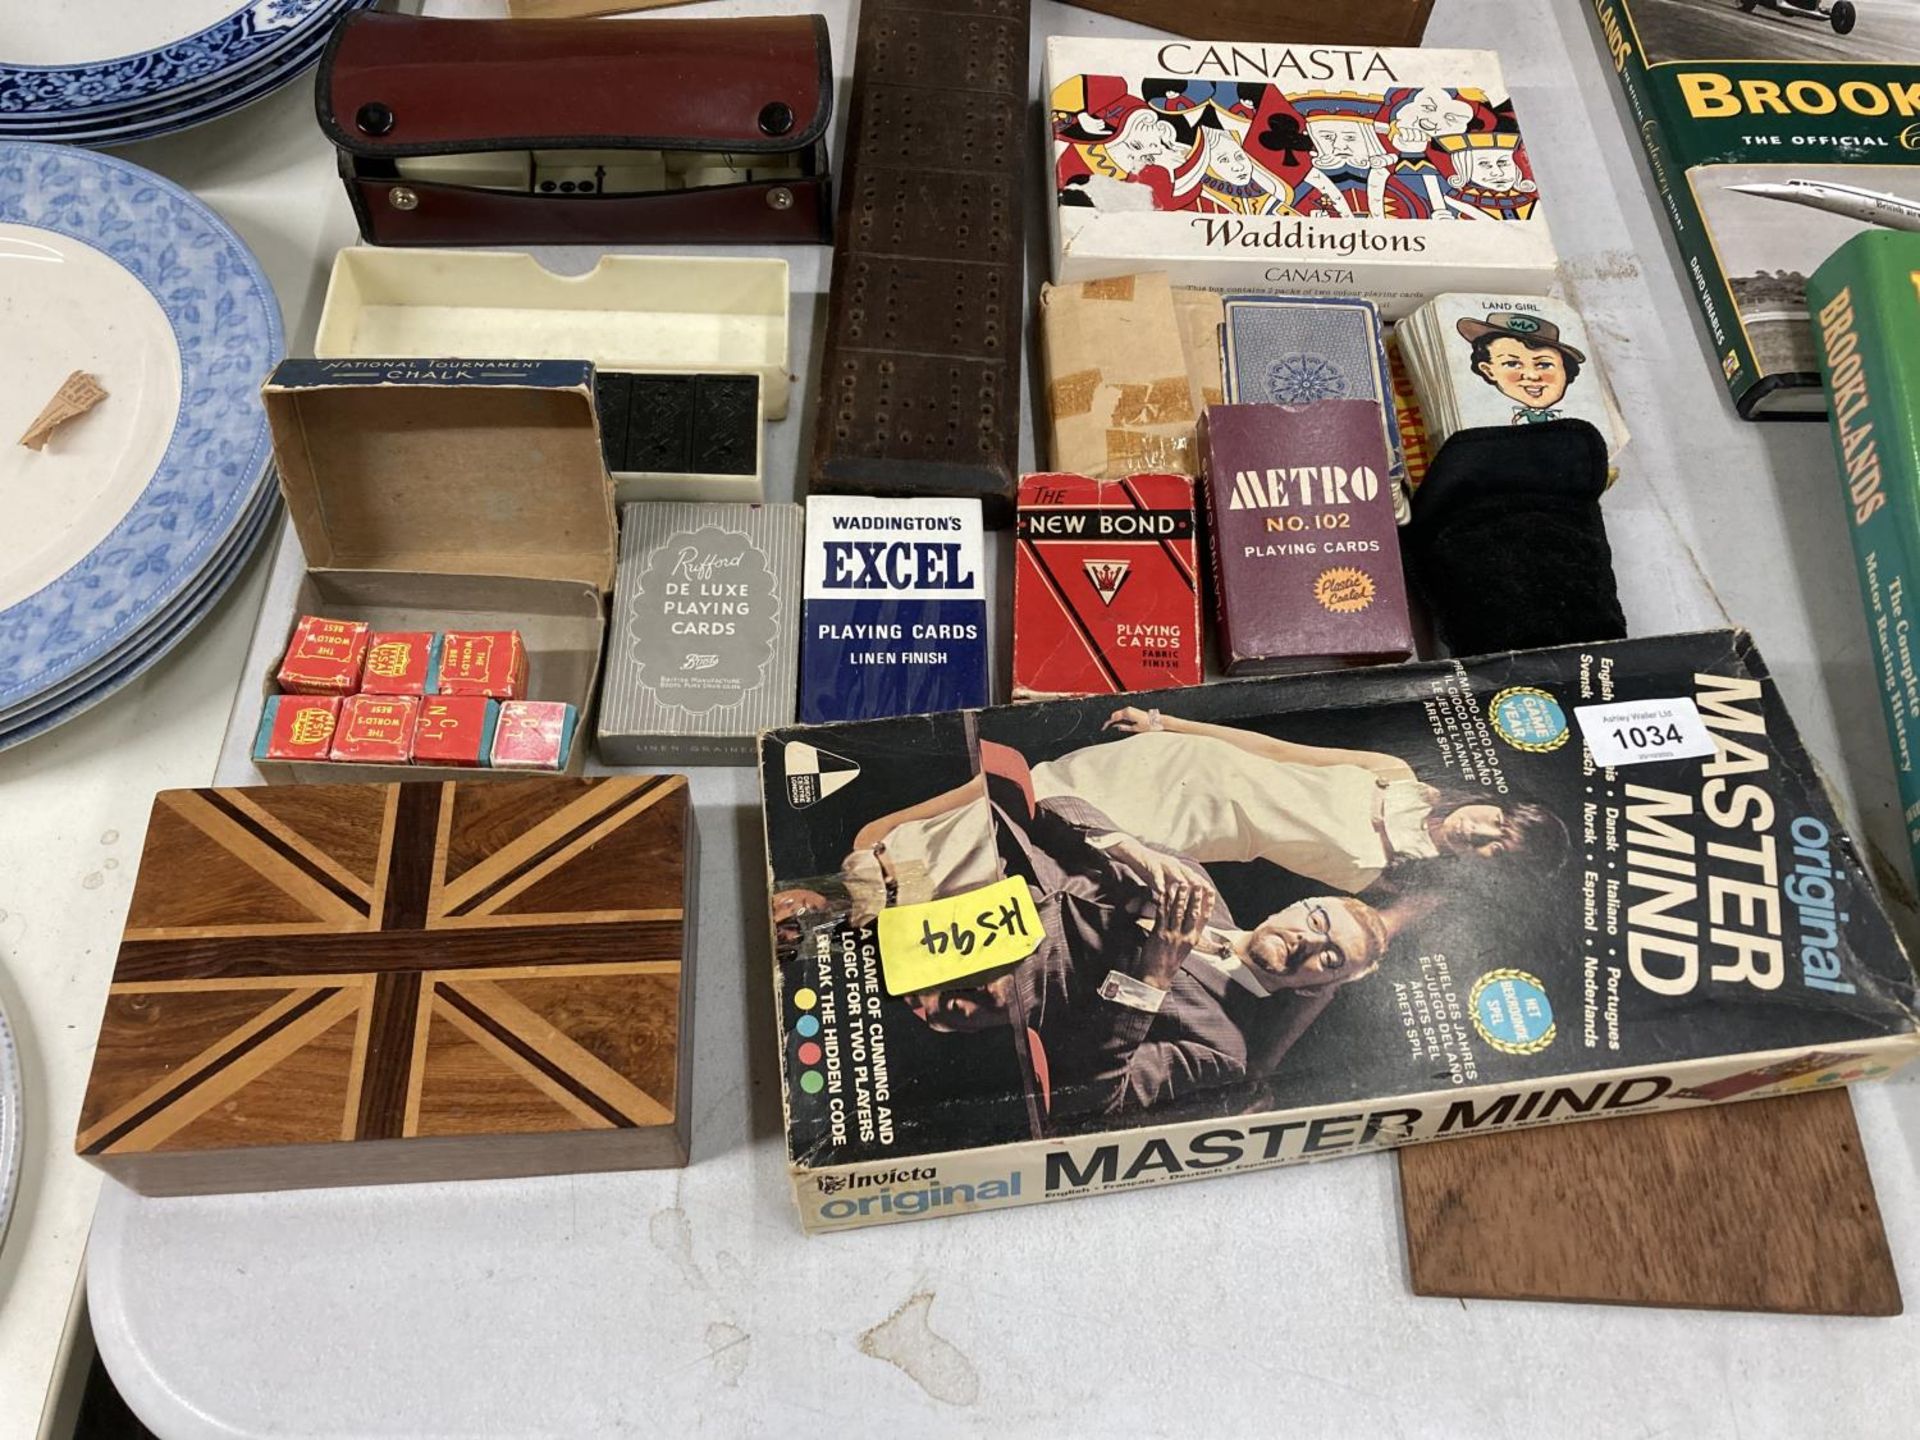 A COLLECTION OF GAMES TO INCLUDE PLAYING CARDS, MASTERMIND, DOMINOES, A CRIBBAGE BOARD, SNOOKER - Image 4 of 4